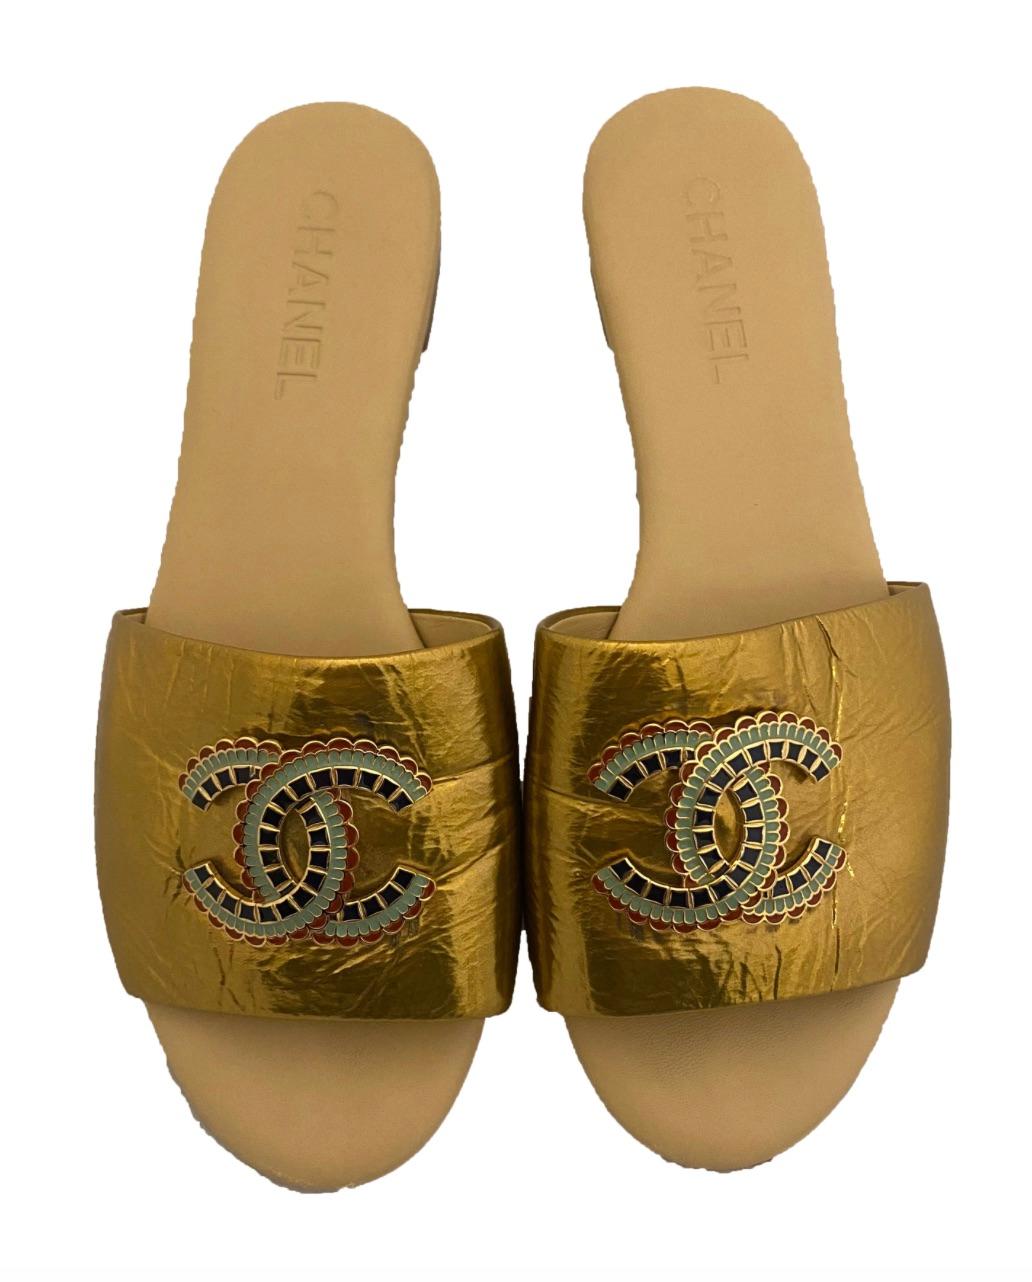 Gold metallic patent leather slide sandals from Chanel. From the Chanel Pre-Fall Metiers d’Arts Egyptian collection from 2019, which was shown in the Metropolitan Museum of Art. Boldly embellished at each metallic gold patent toe strap with a